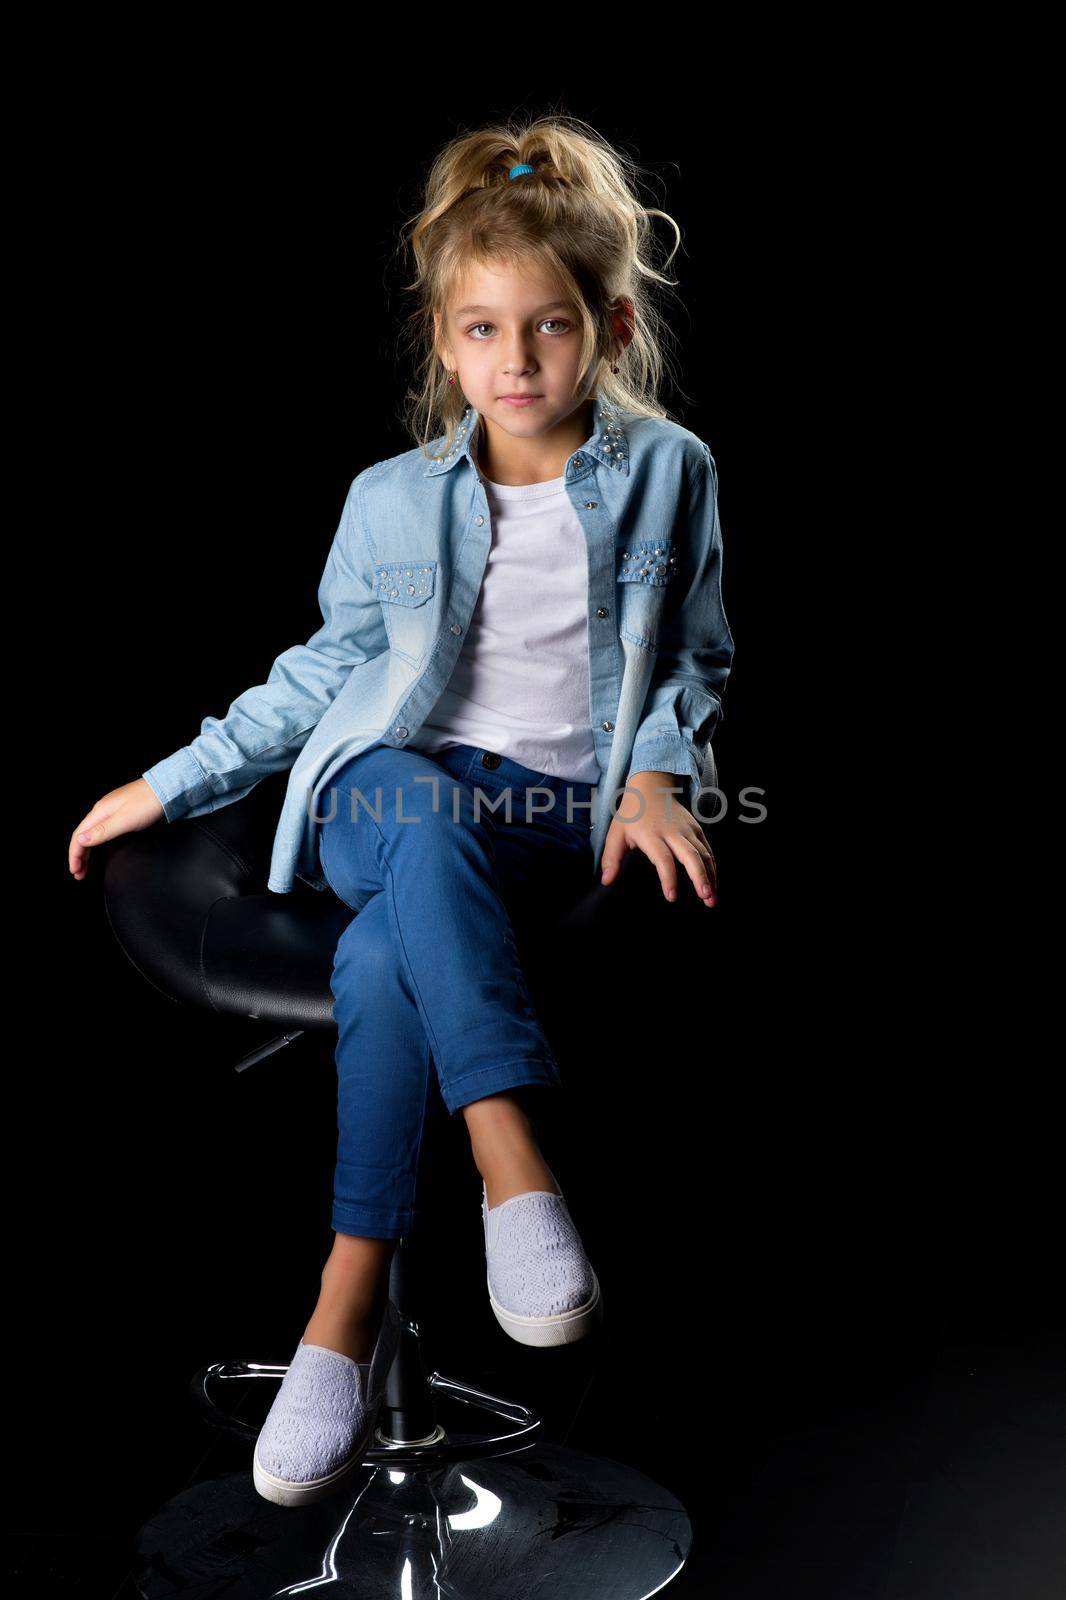 Smiling blonde girl sitting on a high chair in the studio, sitting with her head bowed down, portrait of a cute girl isolated on black background